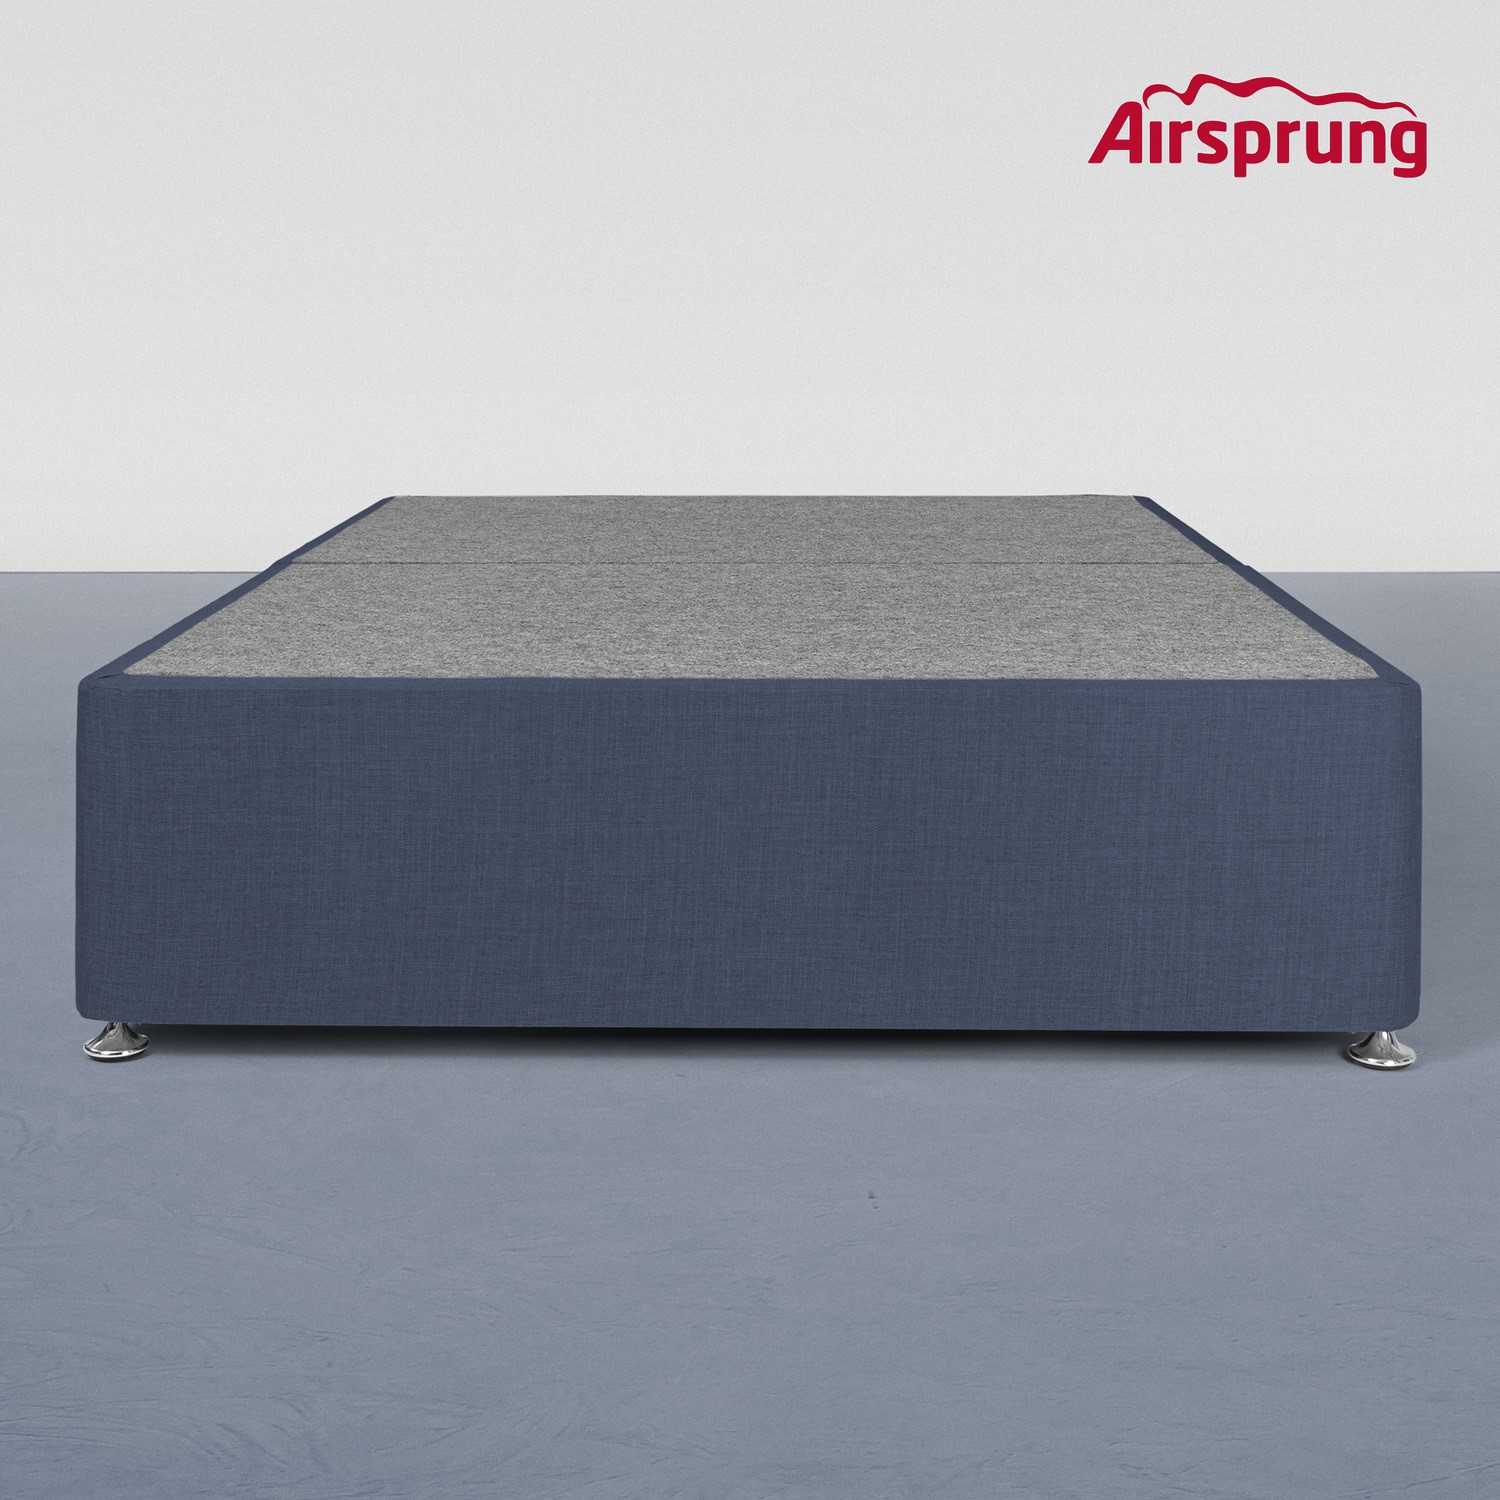 Read more about Airsprung kelston small double 4 drawer divan midnight blue